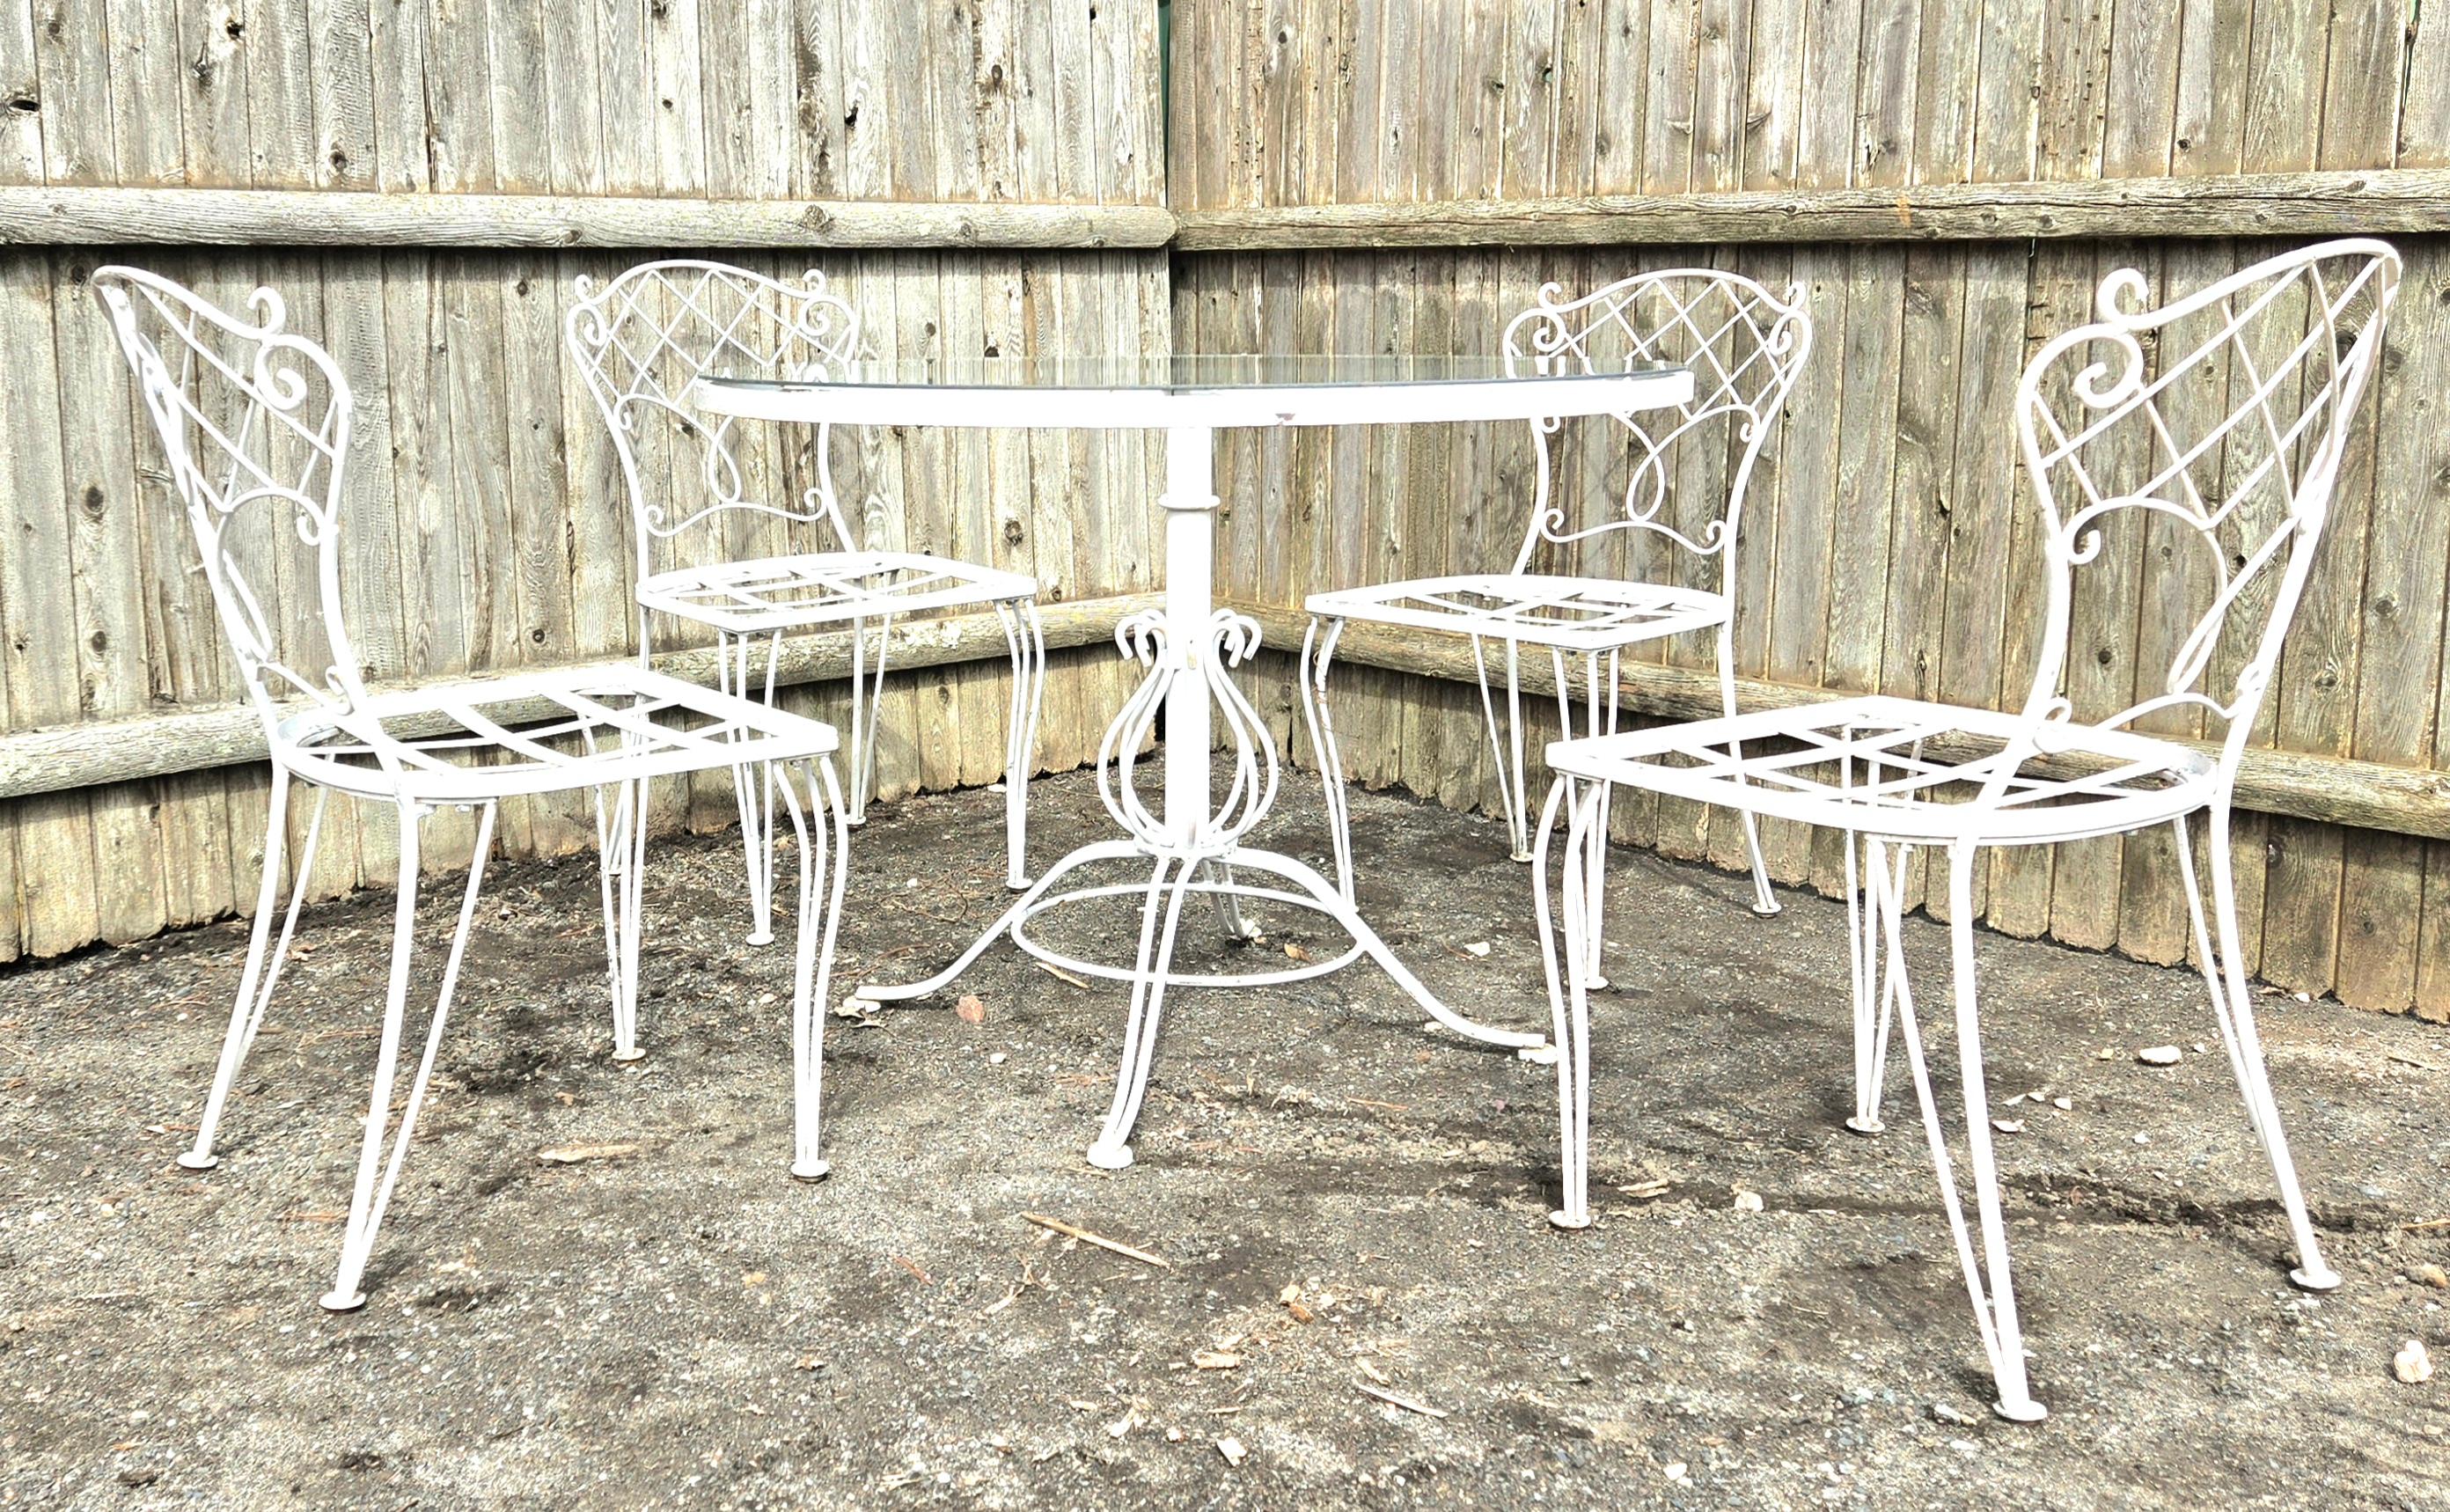 Available now for your enjoyment and ready to ship is a Dining Set of 4 Vintage Wrought Iron Patio Chairs and A Matching Vintage Wrought Iron Pedestal Table.

This lovely Wrought Iron Dining set by Woodard, is the perfect addition to any garden,